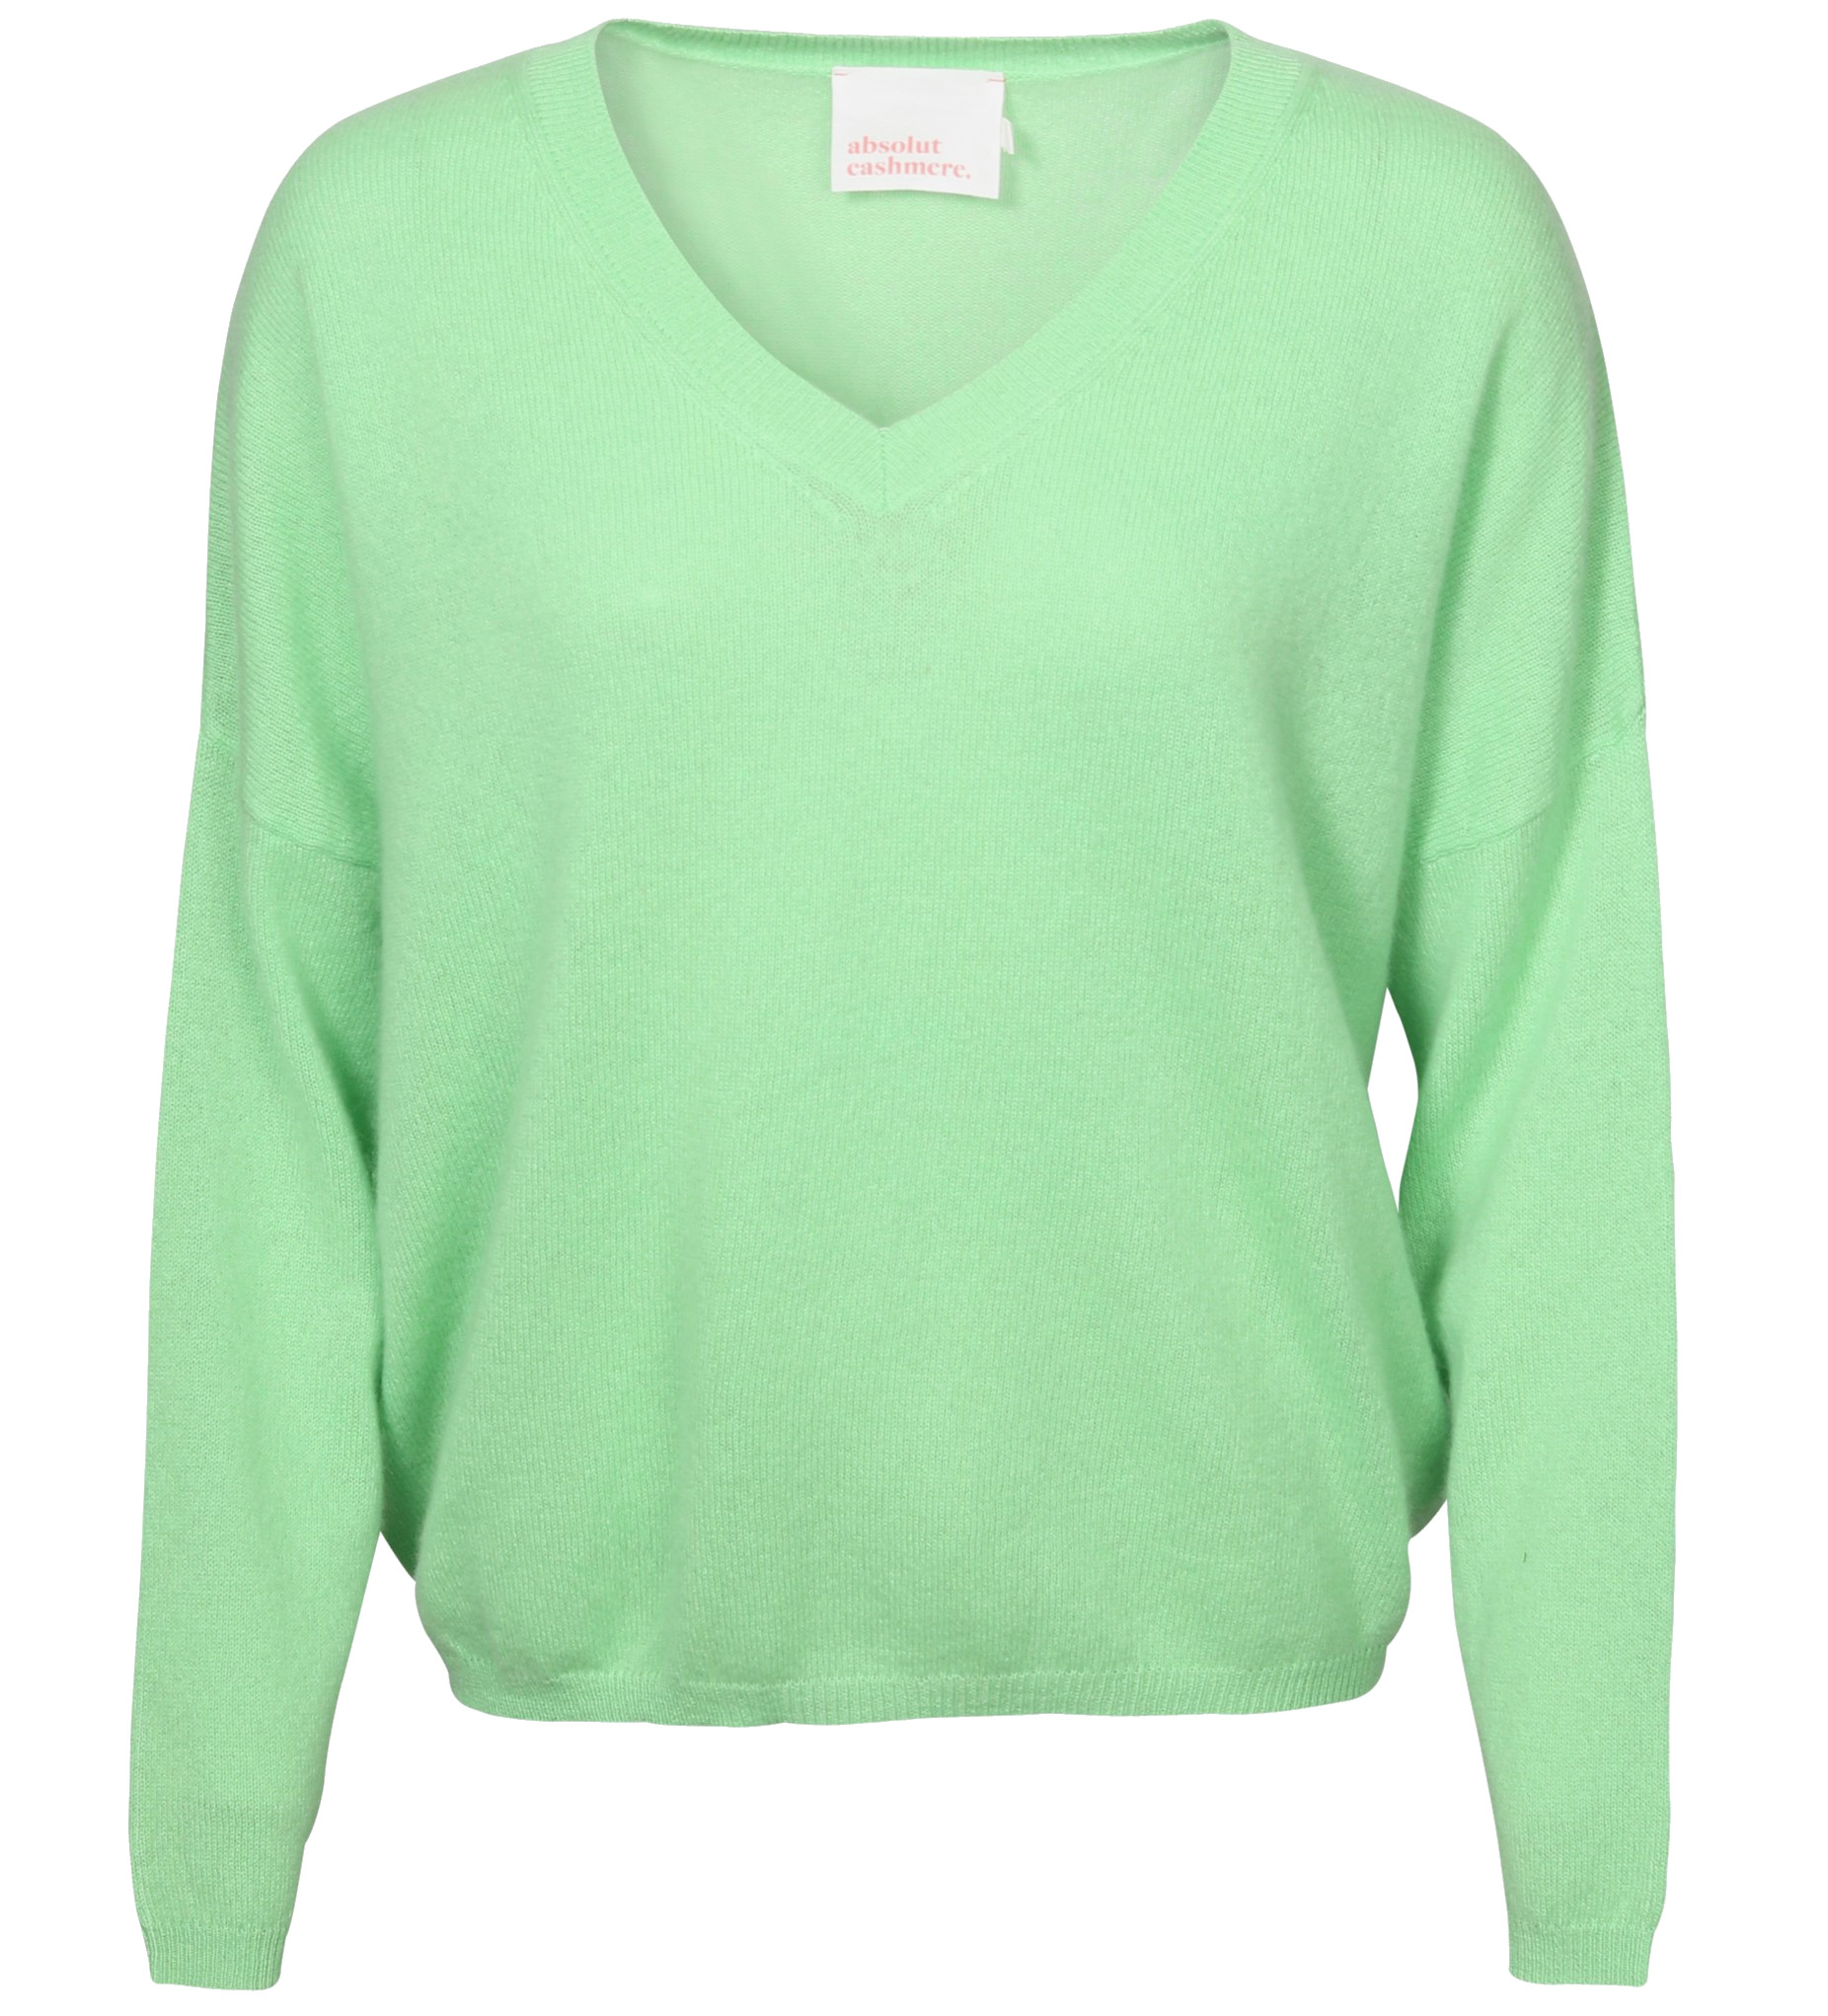 ABSOLUT CASHMERE V-Neck Sweater Alicia in Light Green